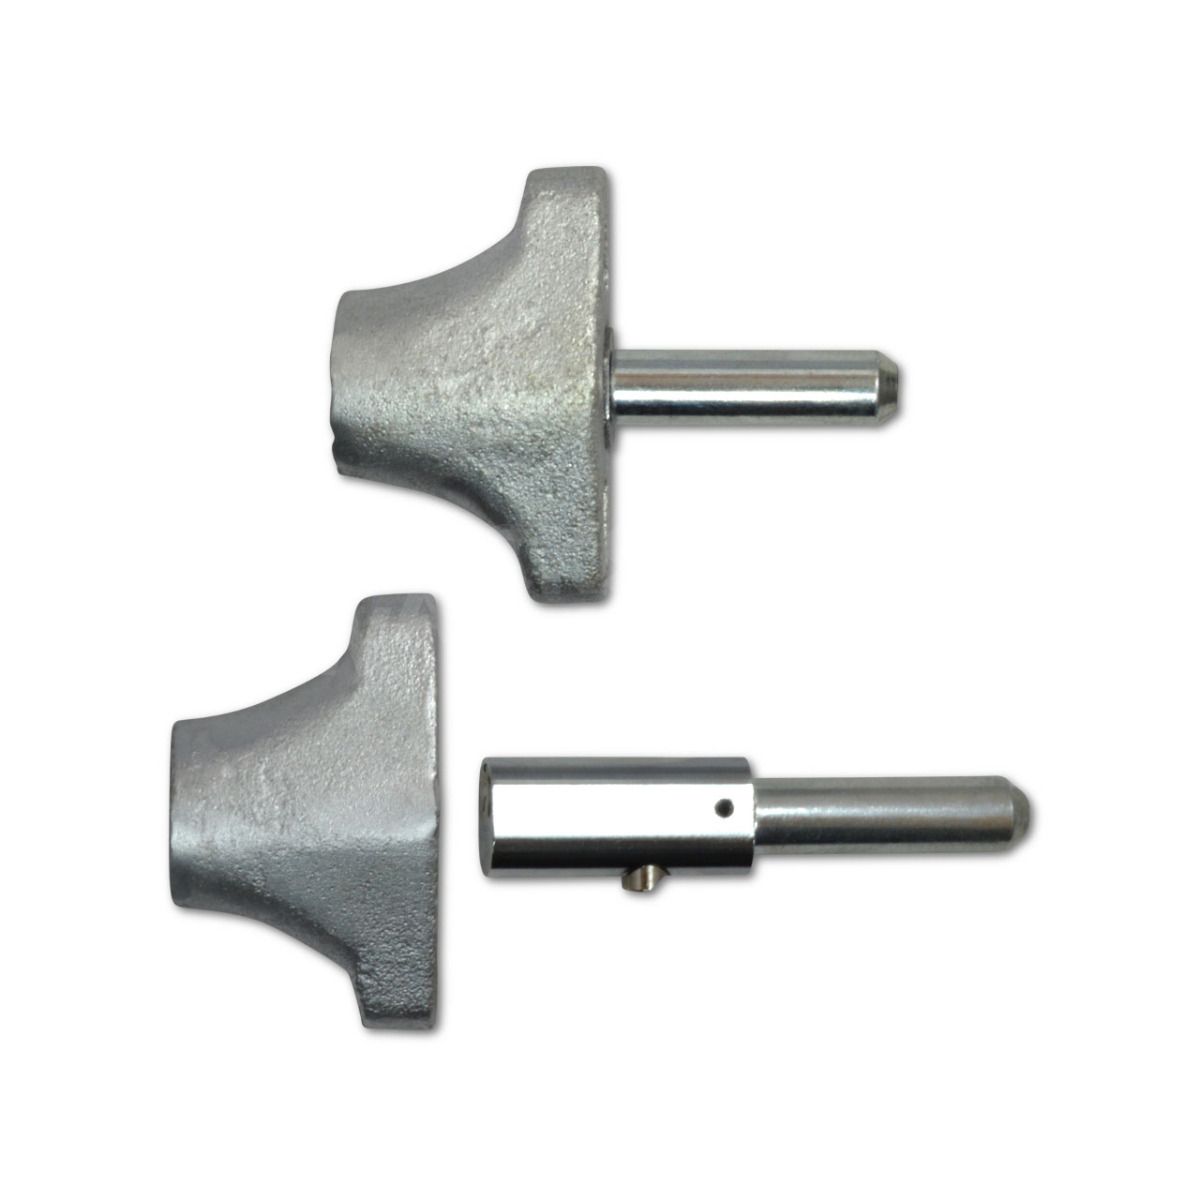 Tessi Bullet locks and Housing Complete (pair)